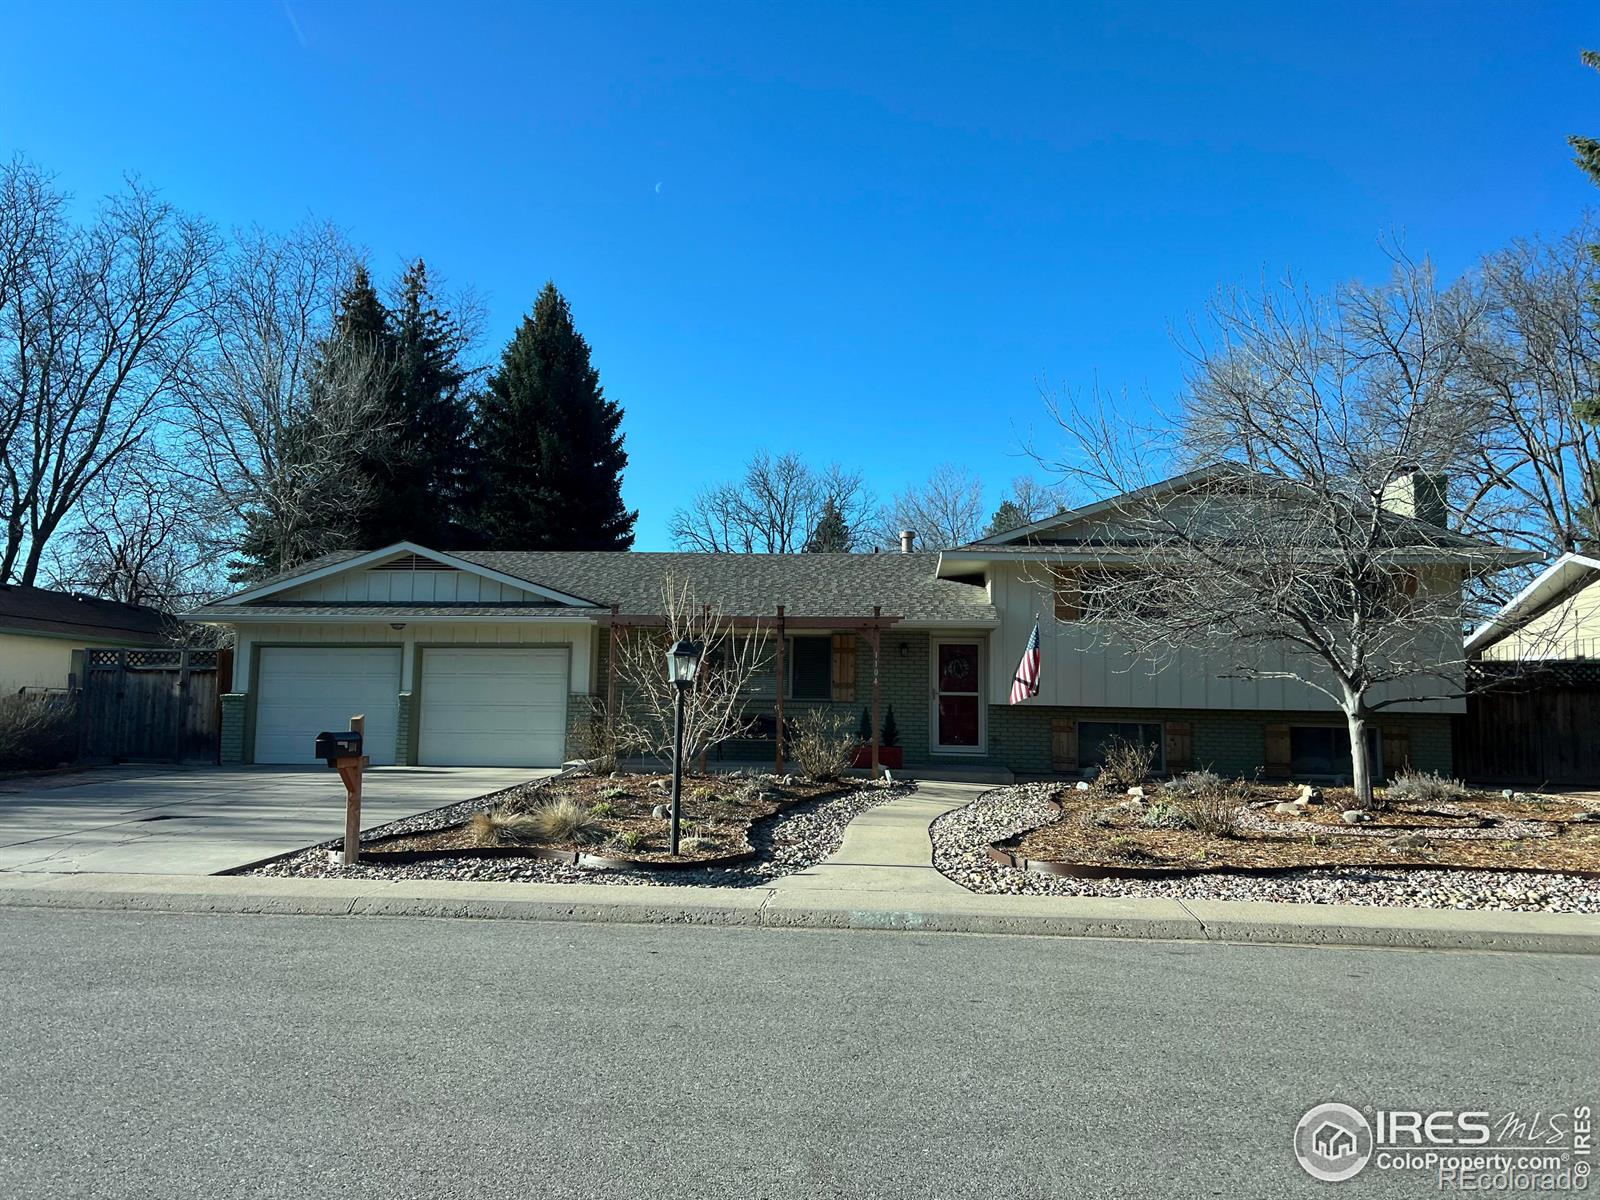 1104  Lory Street, fort collins MLS: 4567891006686 Beds: 4 Baths: 3 Price: $725,000